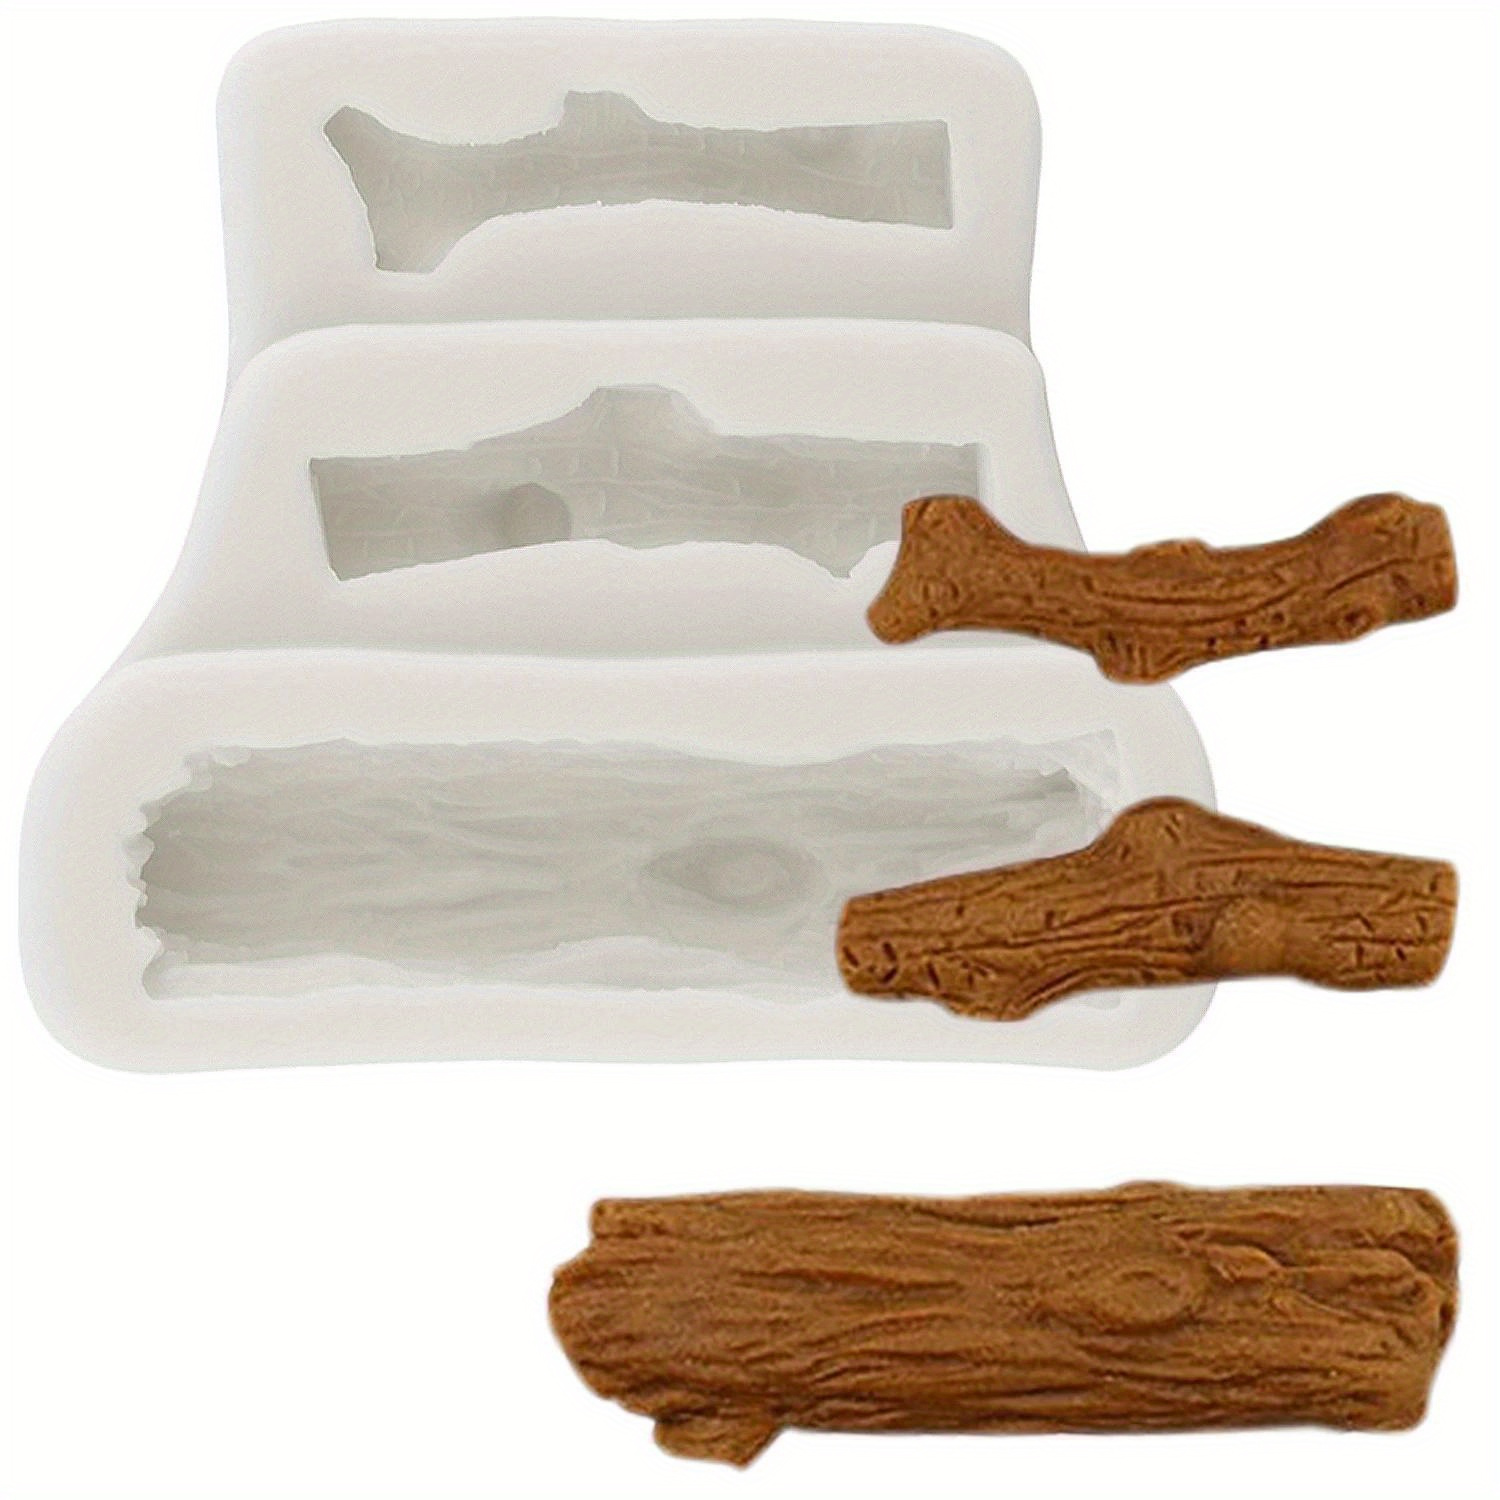 

Silicone Mold Set - Squirrel, Stump & Pine Cones Shapes For Chocolate, Candy, Fondant - Easy Clean, High-quality Baking Tools